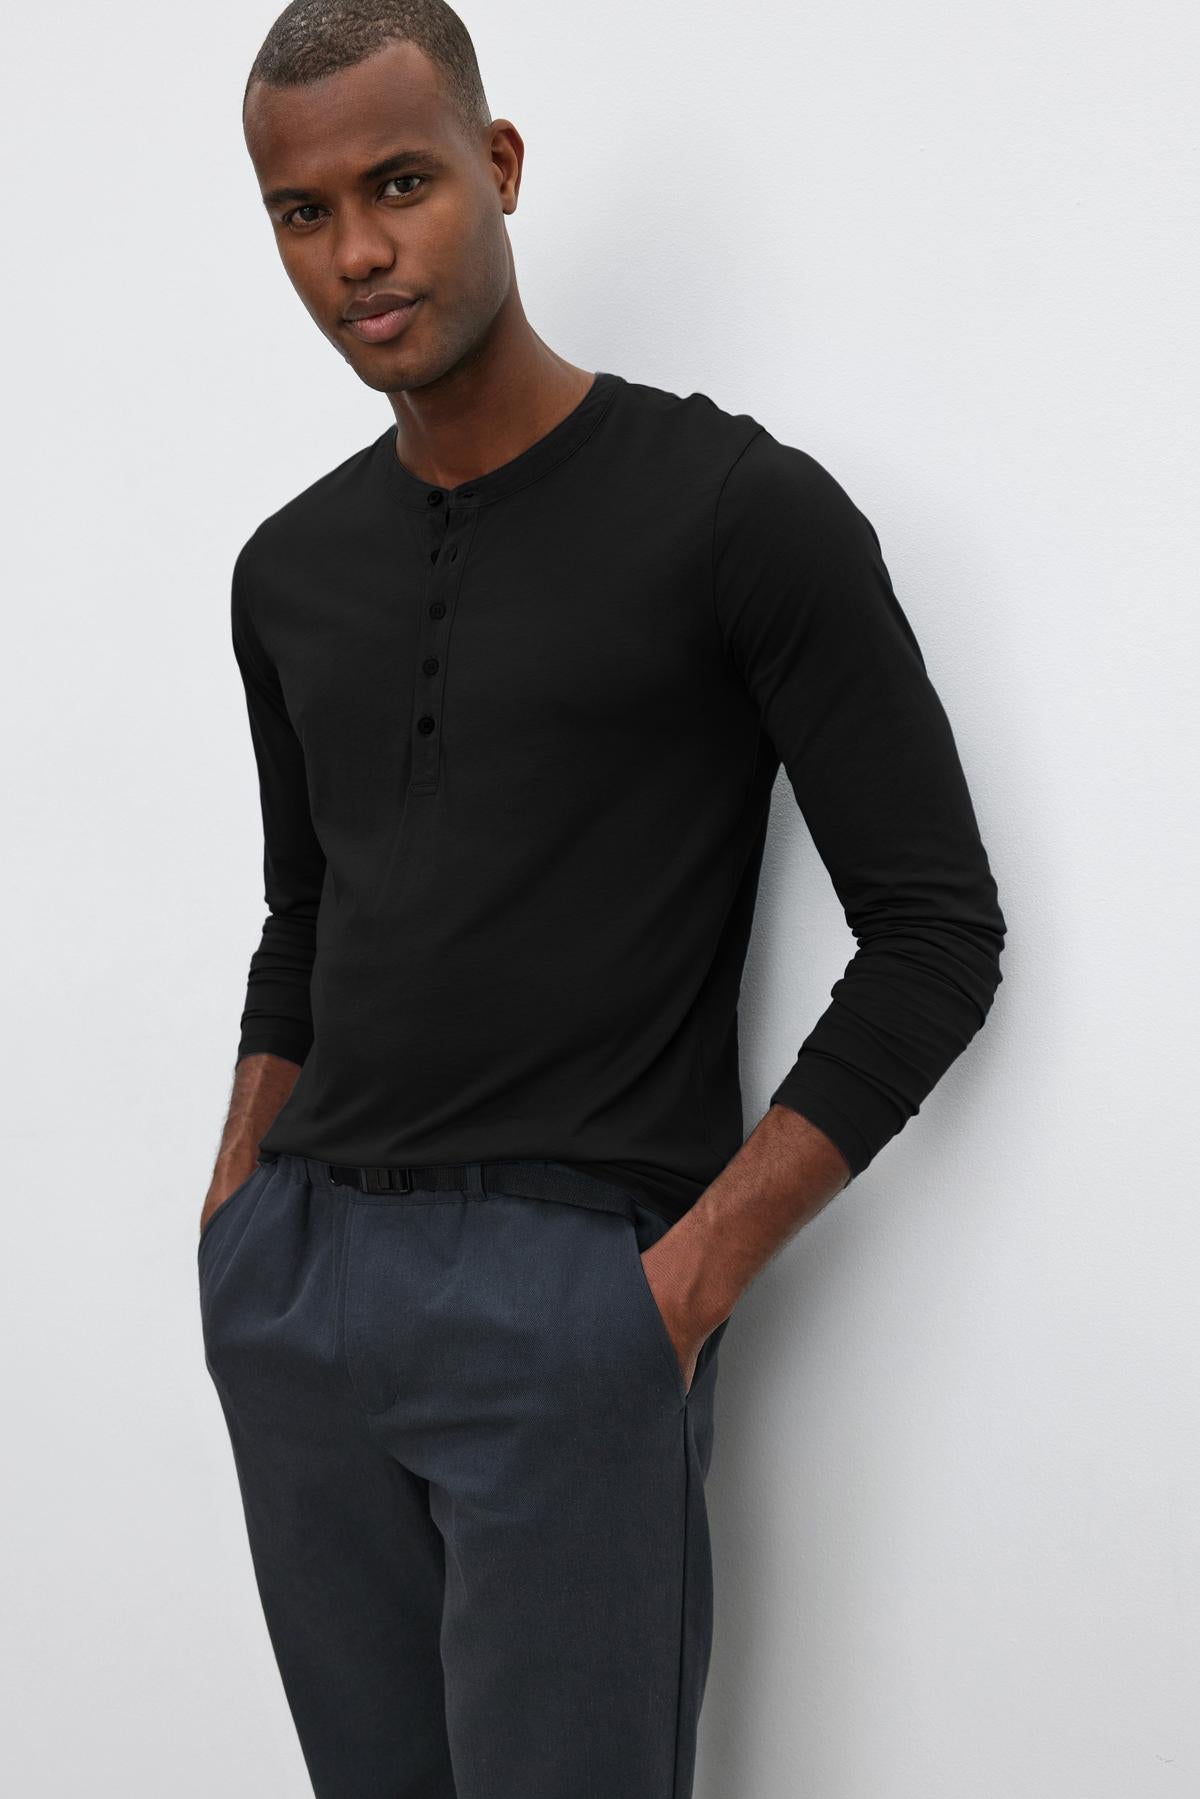 A person stands against a plain background, wearing a black long-sleeve ALVARO HENLEY by Velvet by Graham & Spencer and dark pants, with hands in pockets.-36273890394305